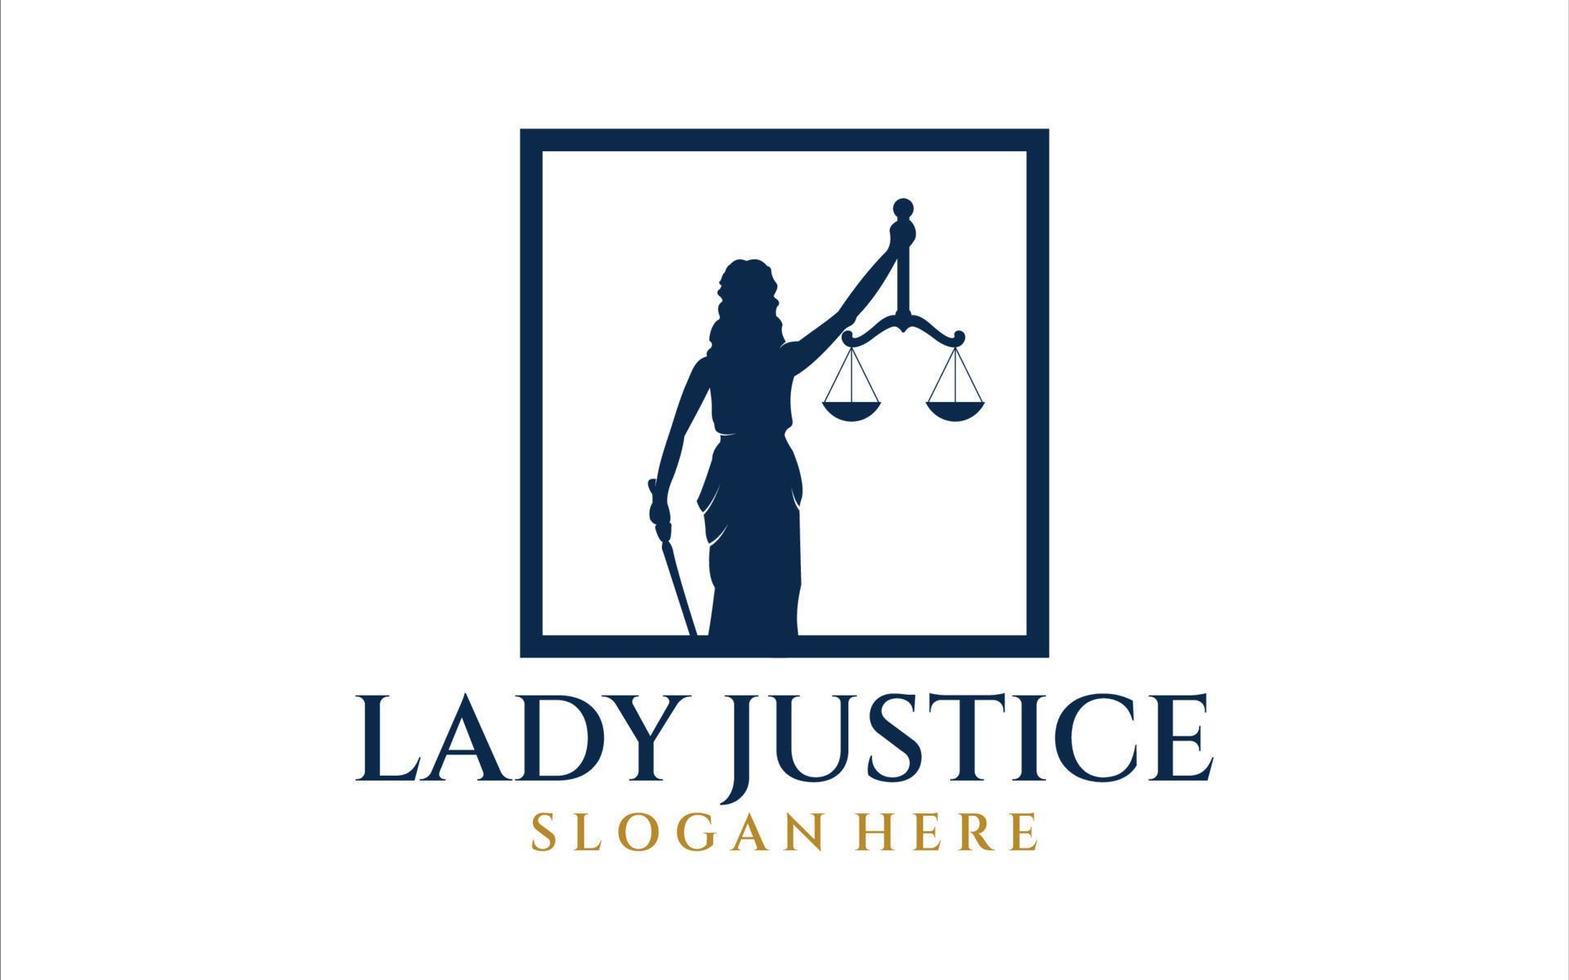 lady law concept, lawyer, justice design.Logo or label for law firm. Vector illustration.